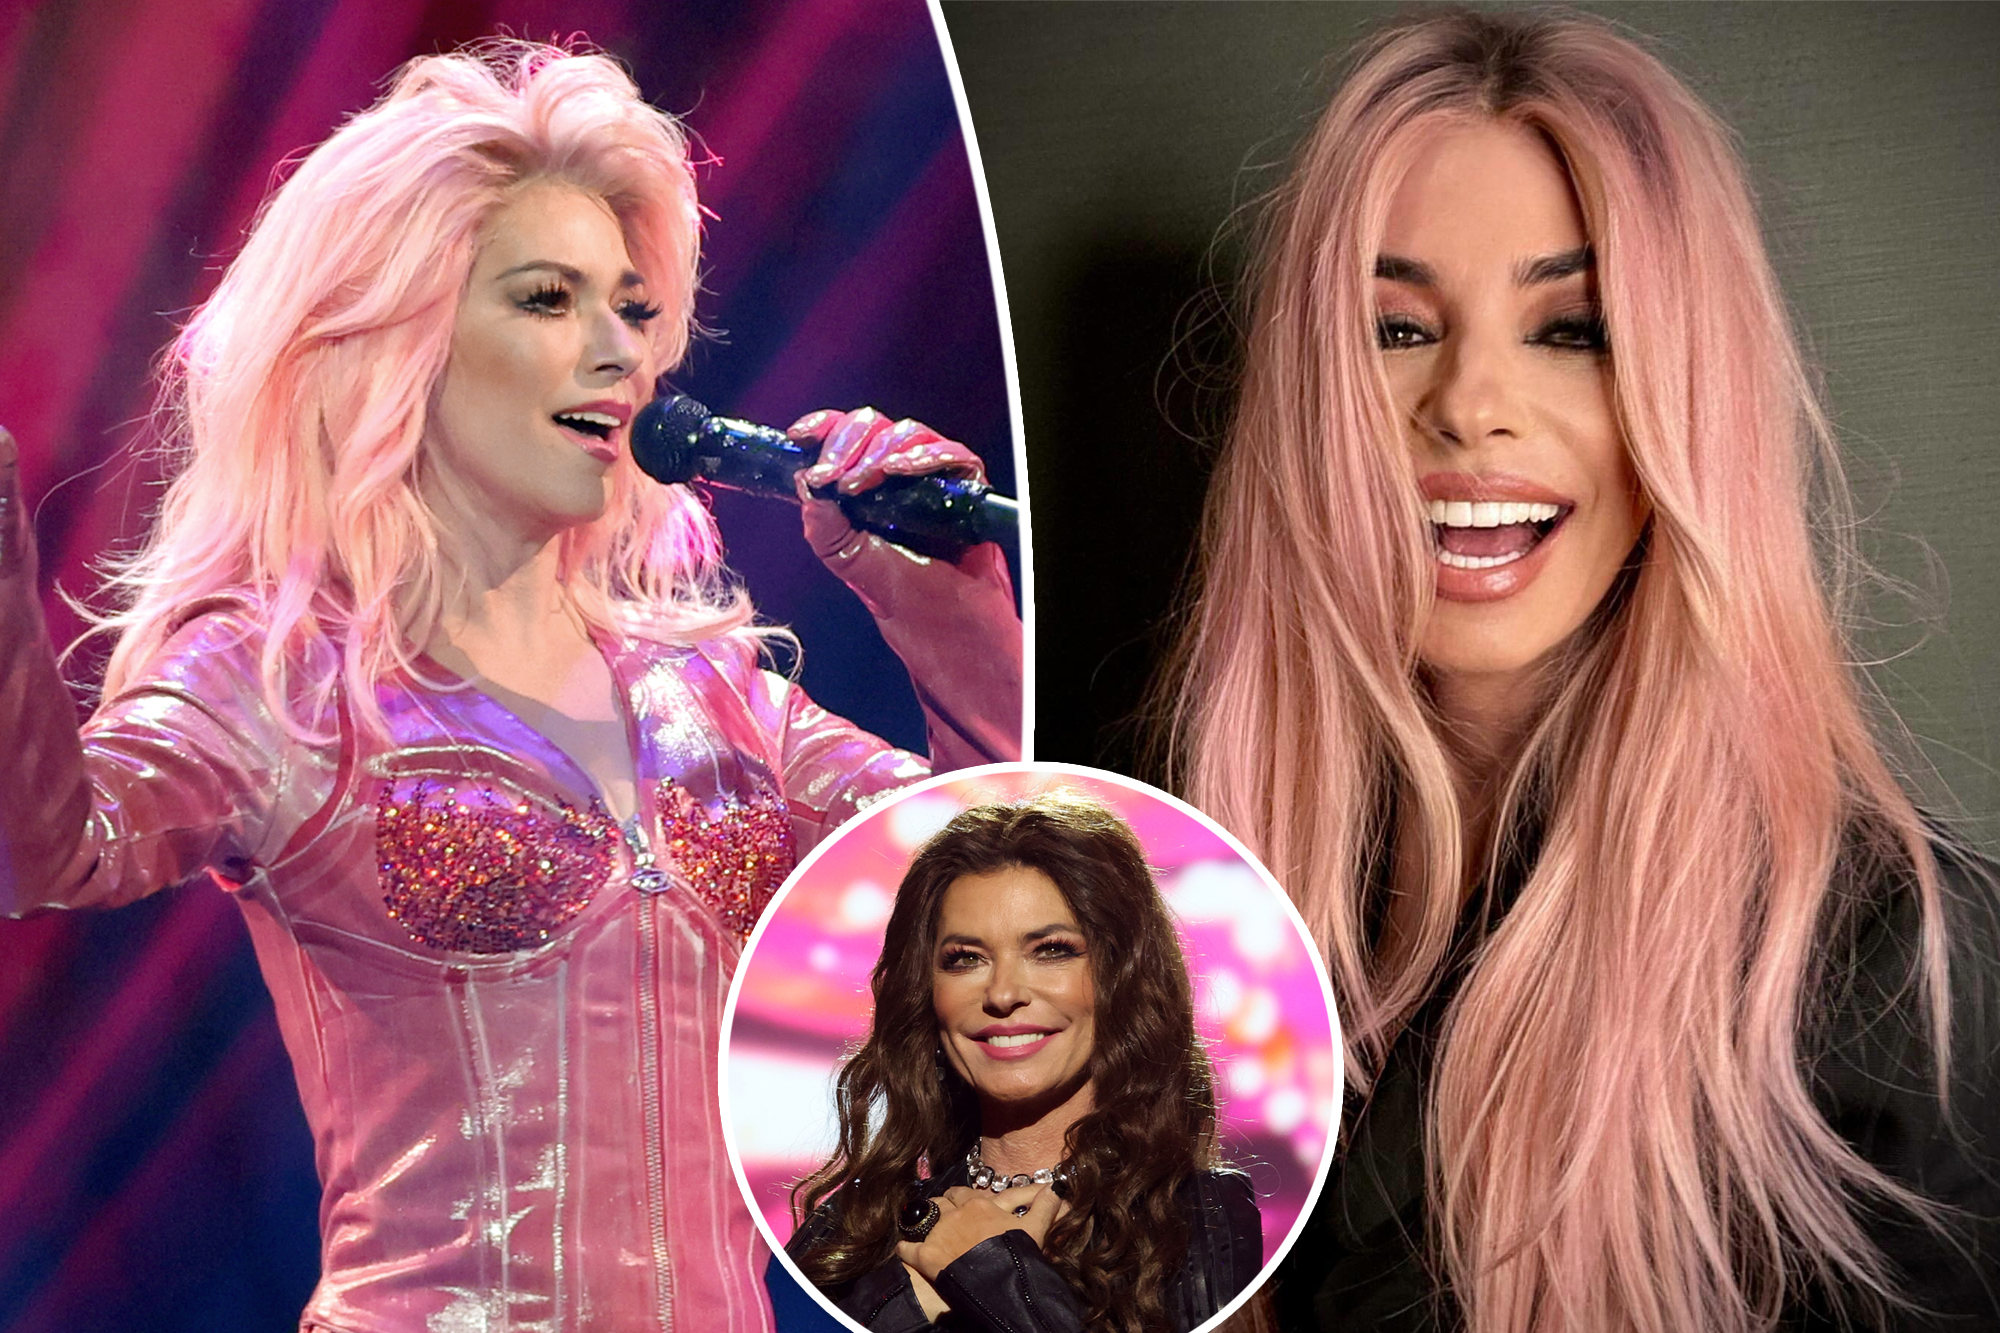 Shania Twain Embraces Aging with Pink Hair Transformation